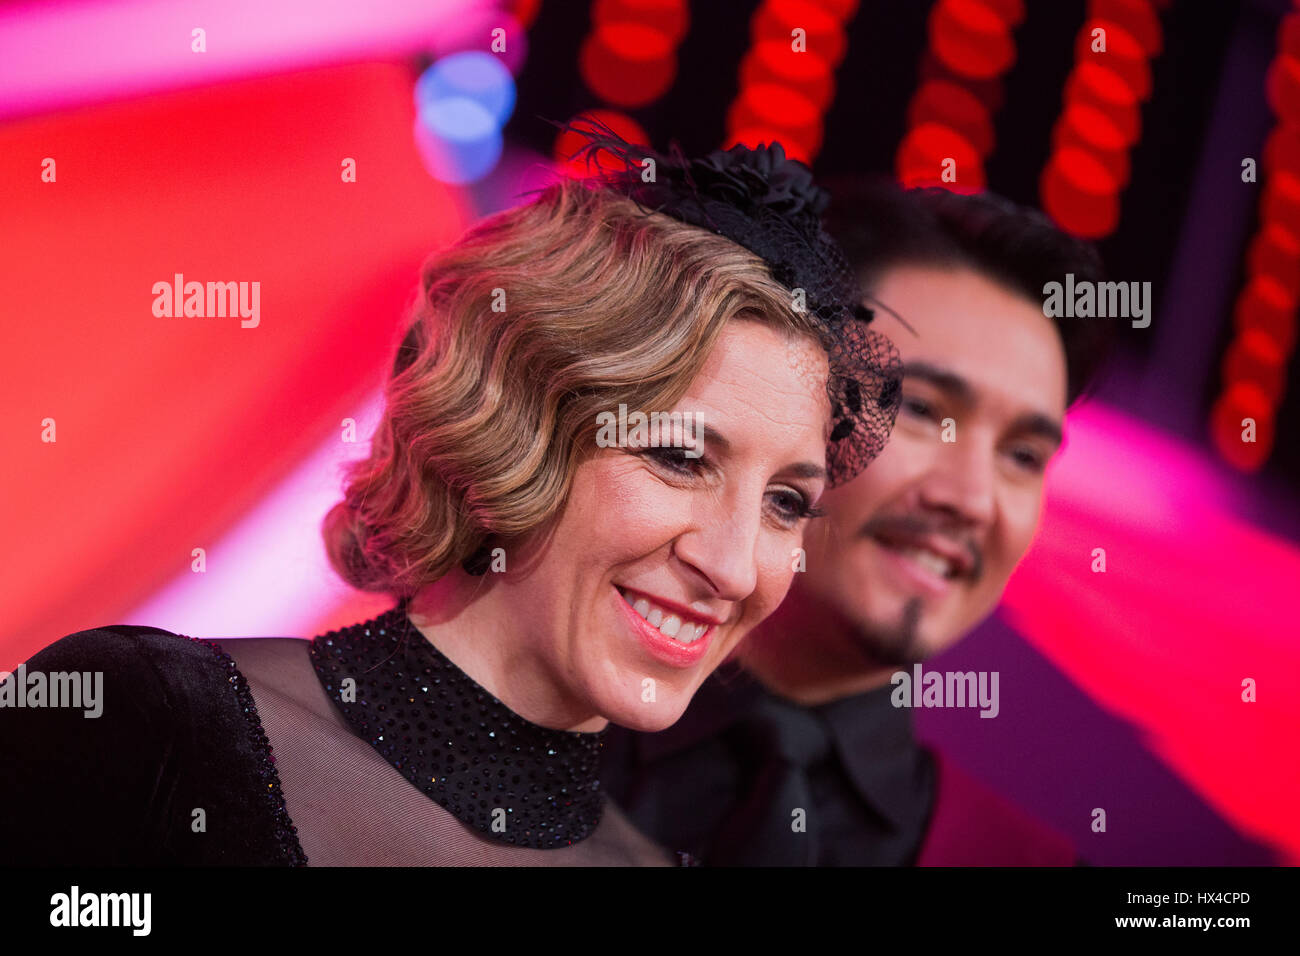 Cologne, Germany. 24th Mar, 2017. The former ice skater Anni Friesinger-Postma and the professional dancer Erich Klann during the RTL dance show 'Let's Dance' at the Coloneum in Cologne, Germany, 24 March 2017. Photo: Rolf Vennenbernd/dpa/Alamy Live News Stock Photo